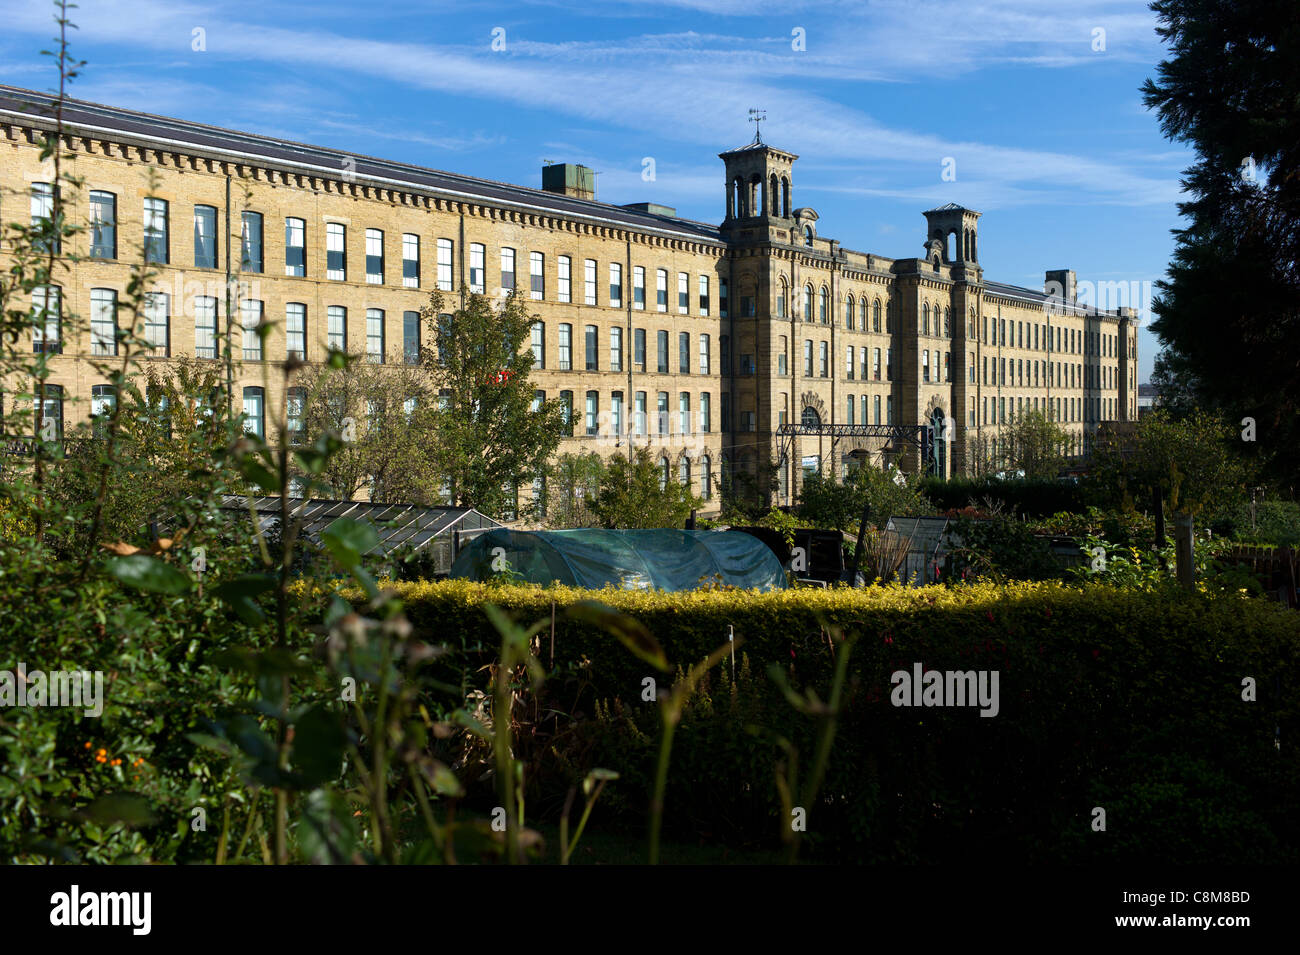 https://c8.alamy.com/comp/C8M8BD/salts-mill-at-saltaire-bradford-uk-which-houses-the-1853-gallery-featuring-C8M8BD.jpg